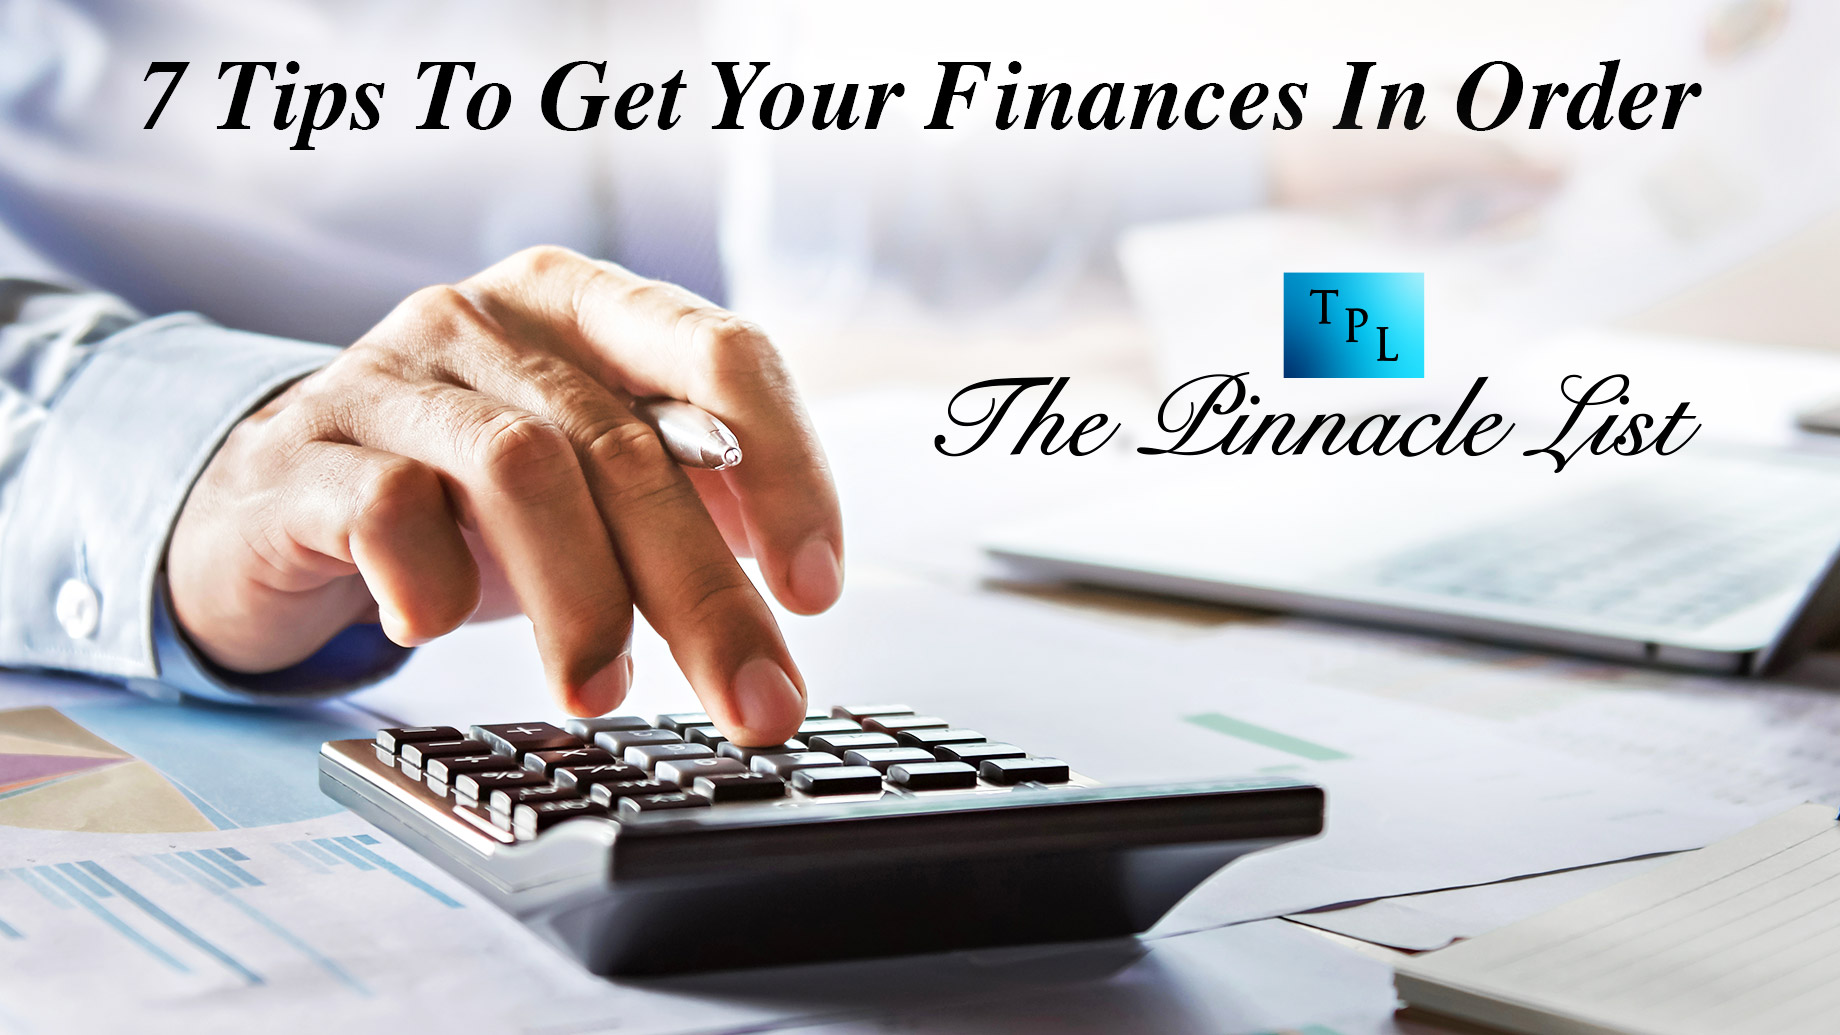 7 Tips To Get Your Finances In Order